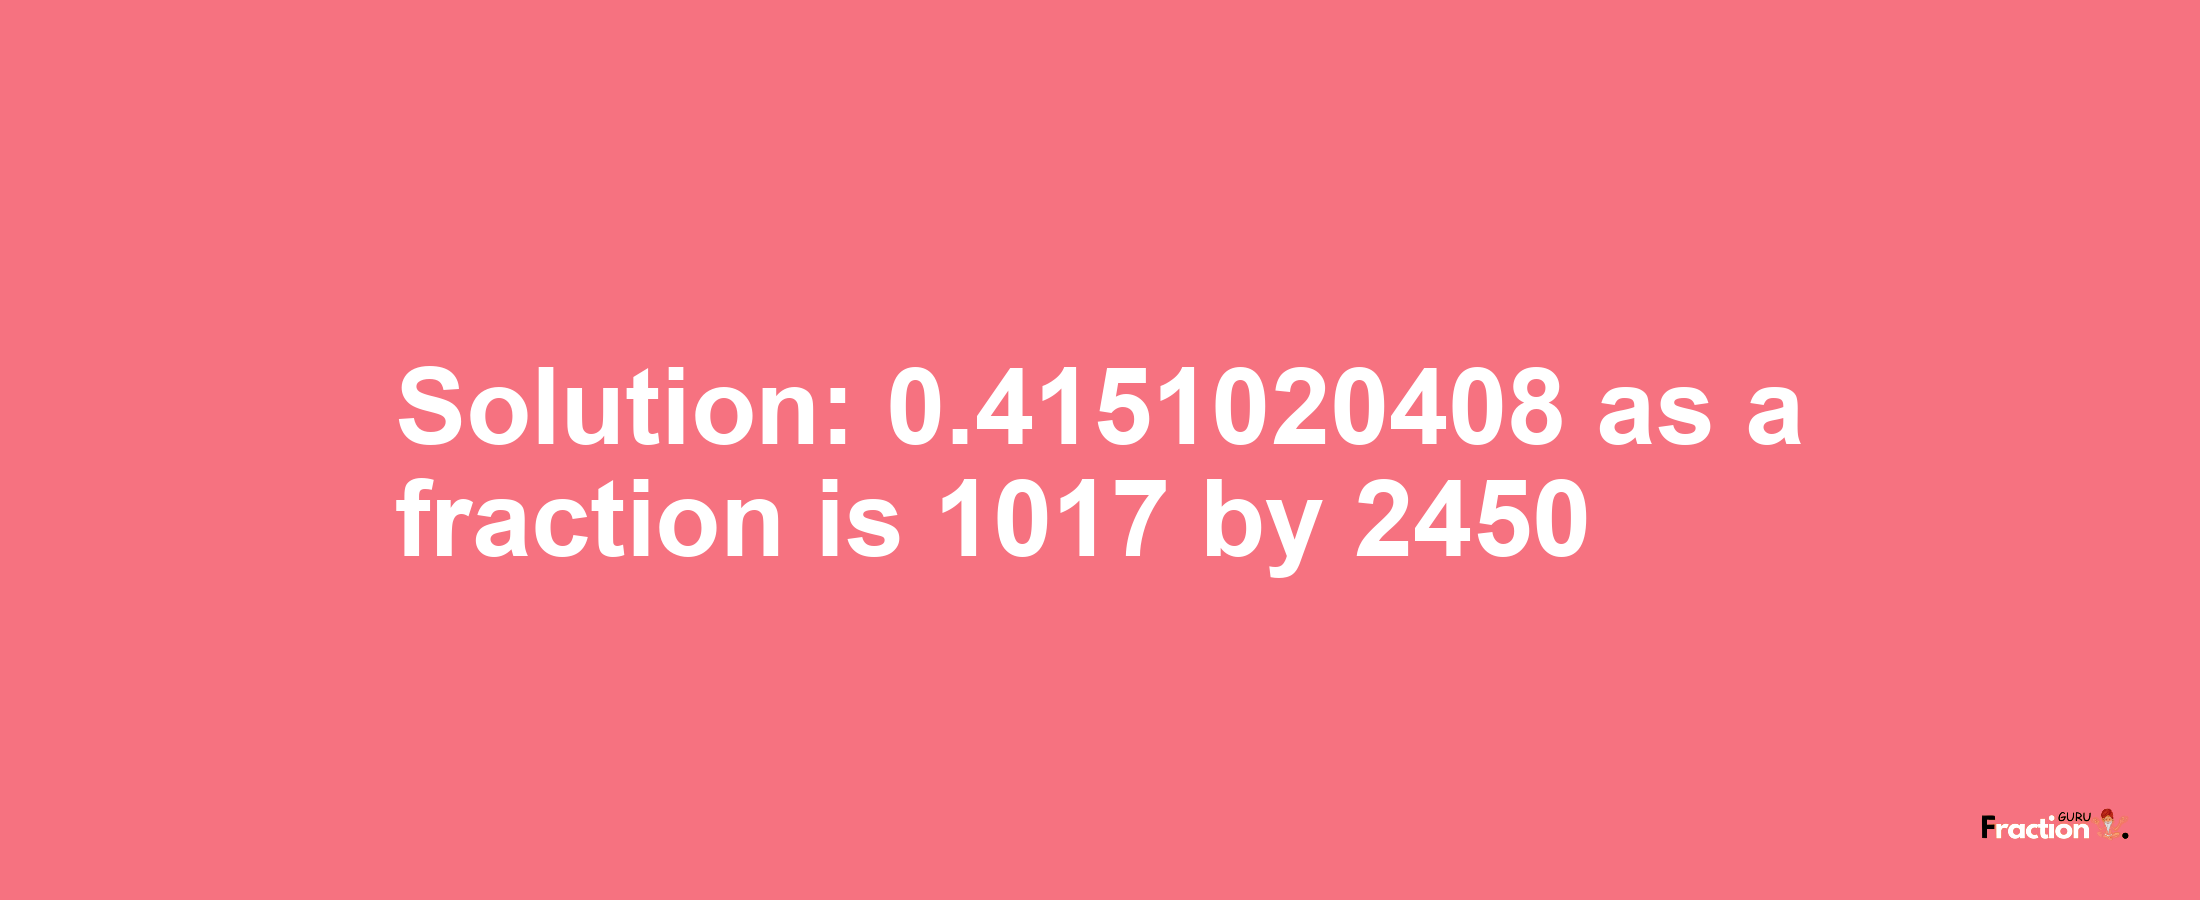 Solution:0.4151020408 as a fraction is 1017/2450